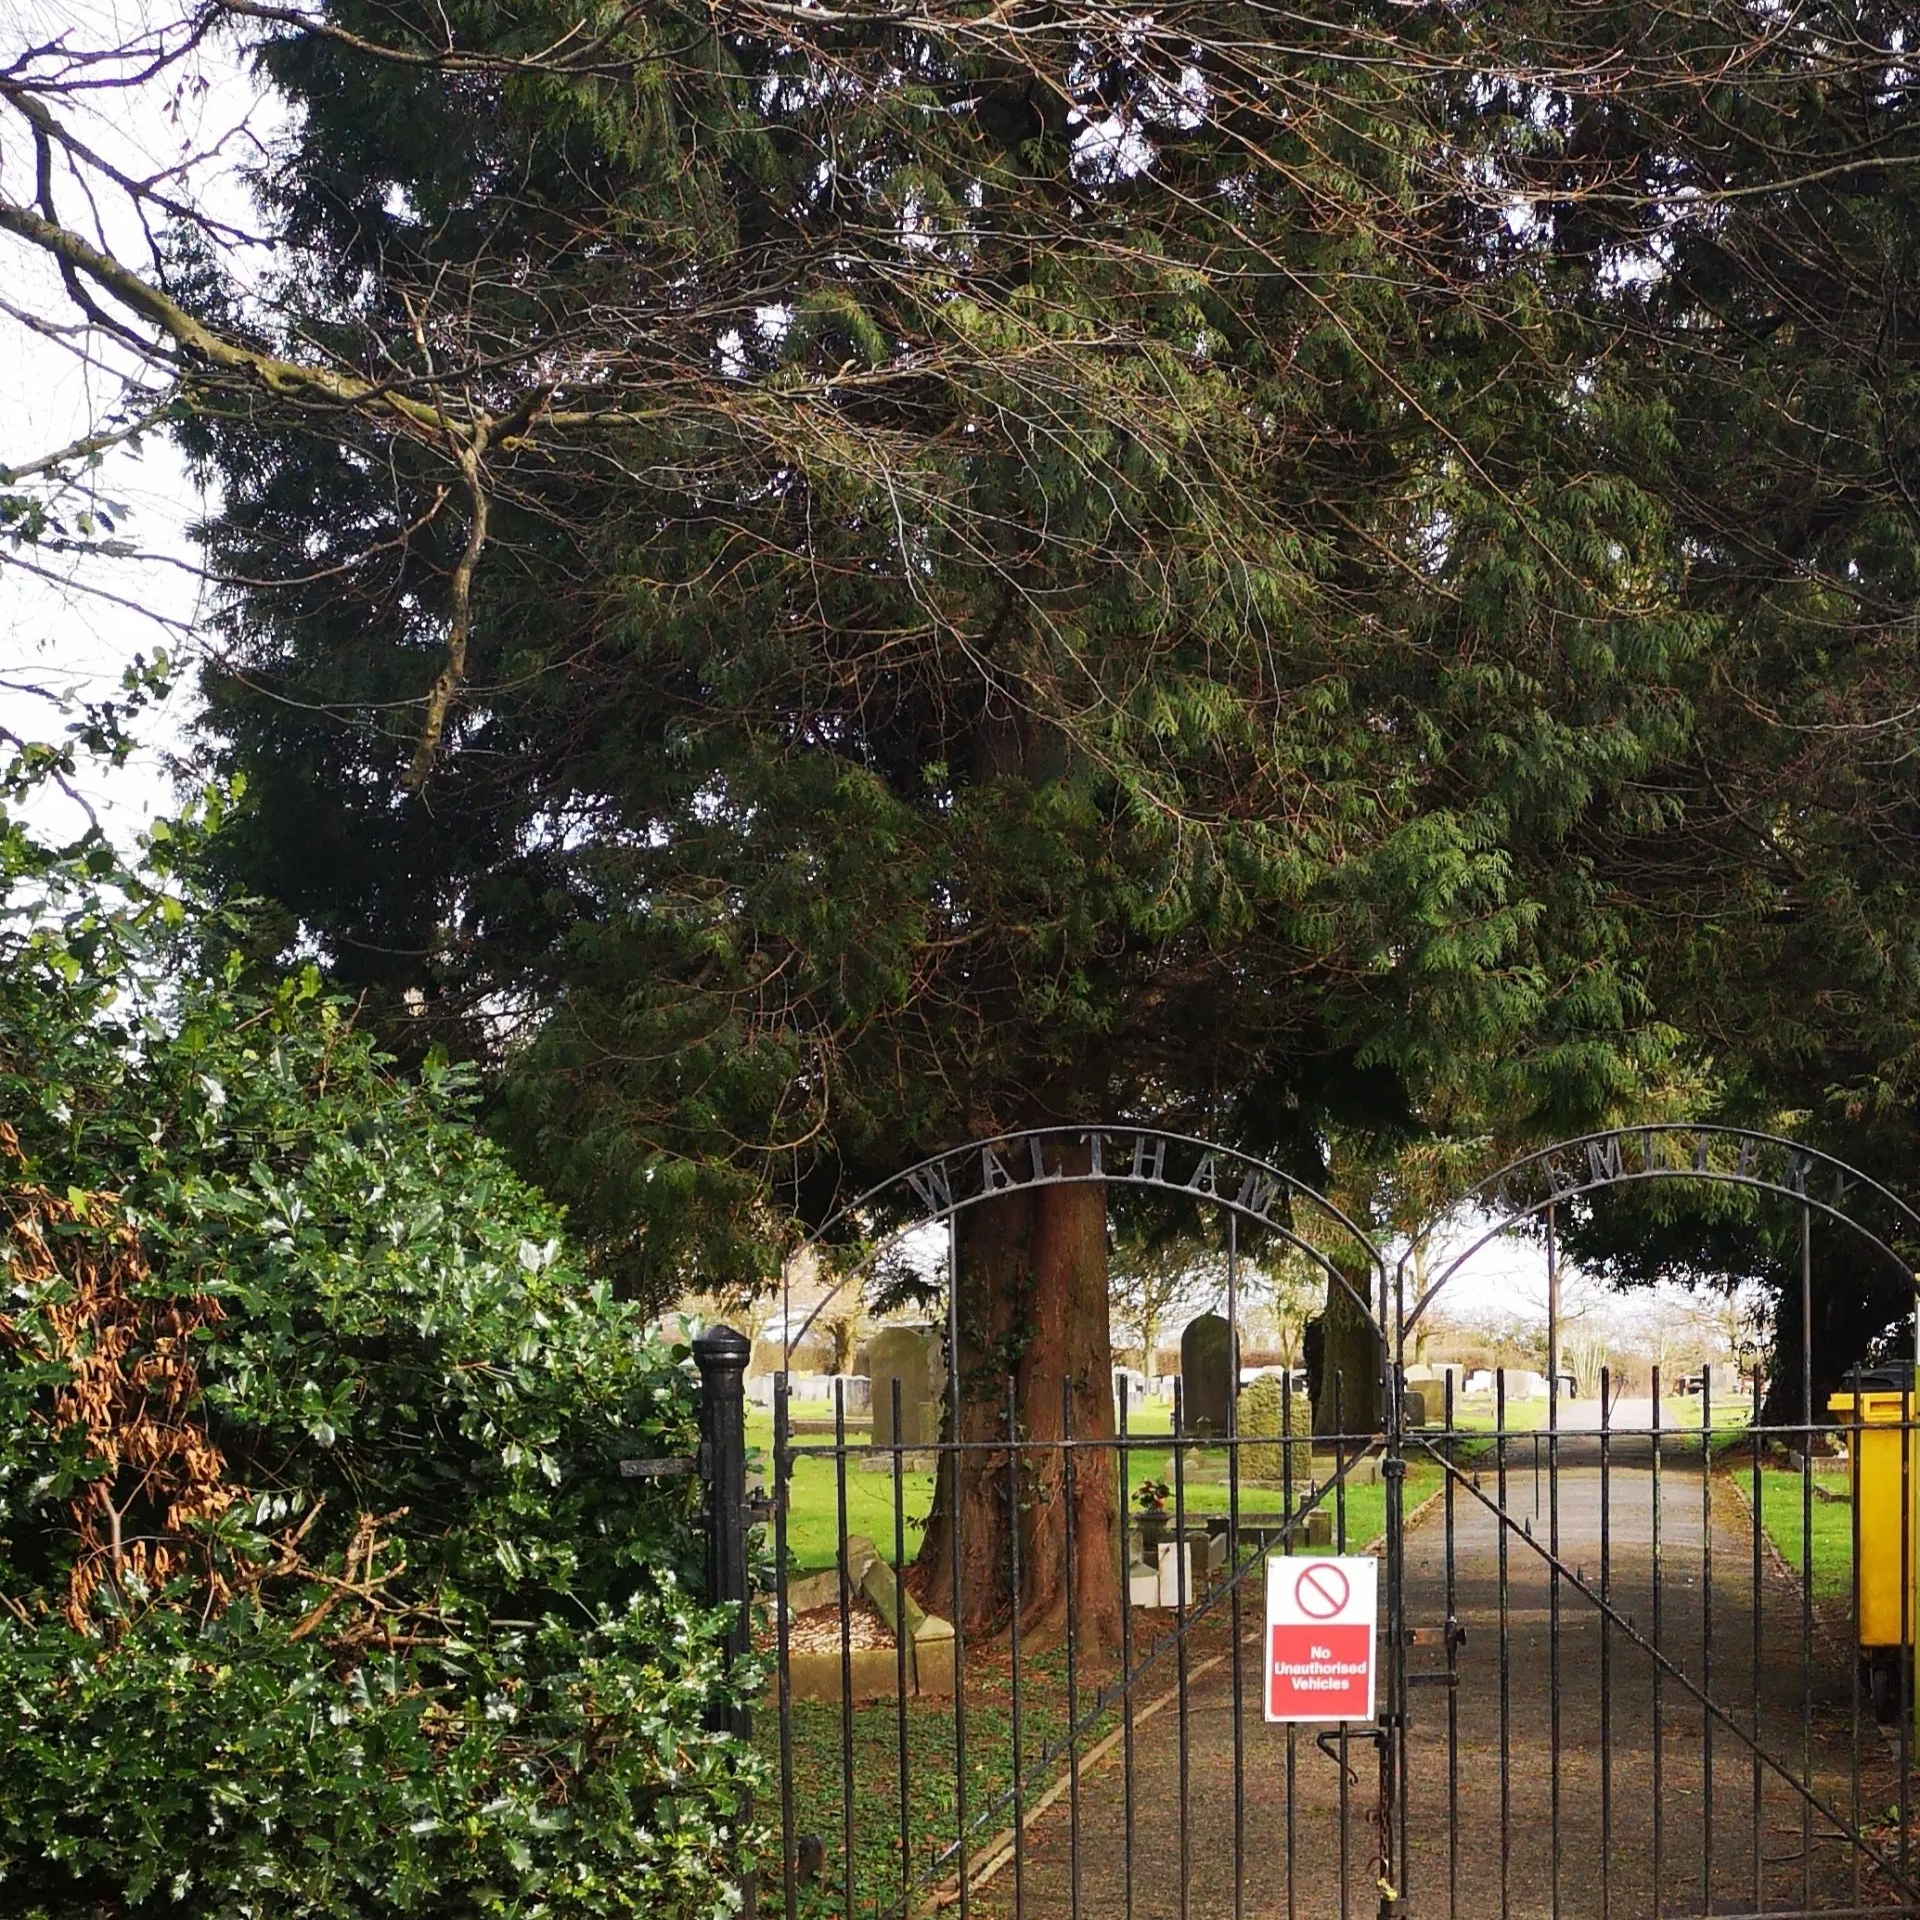 Picture of Waltham Cemetery Entrance